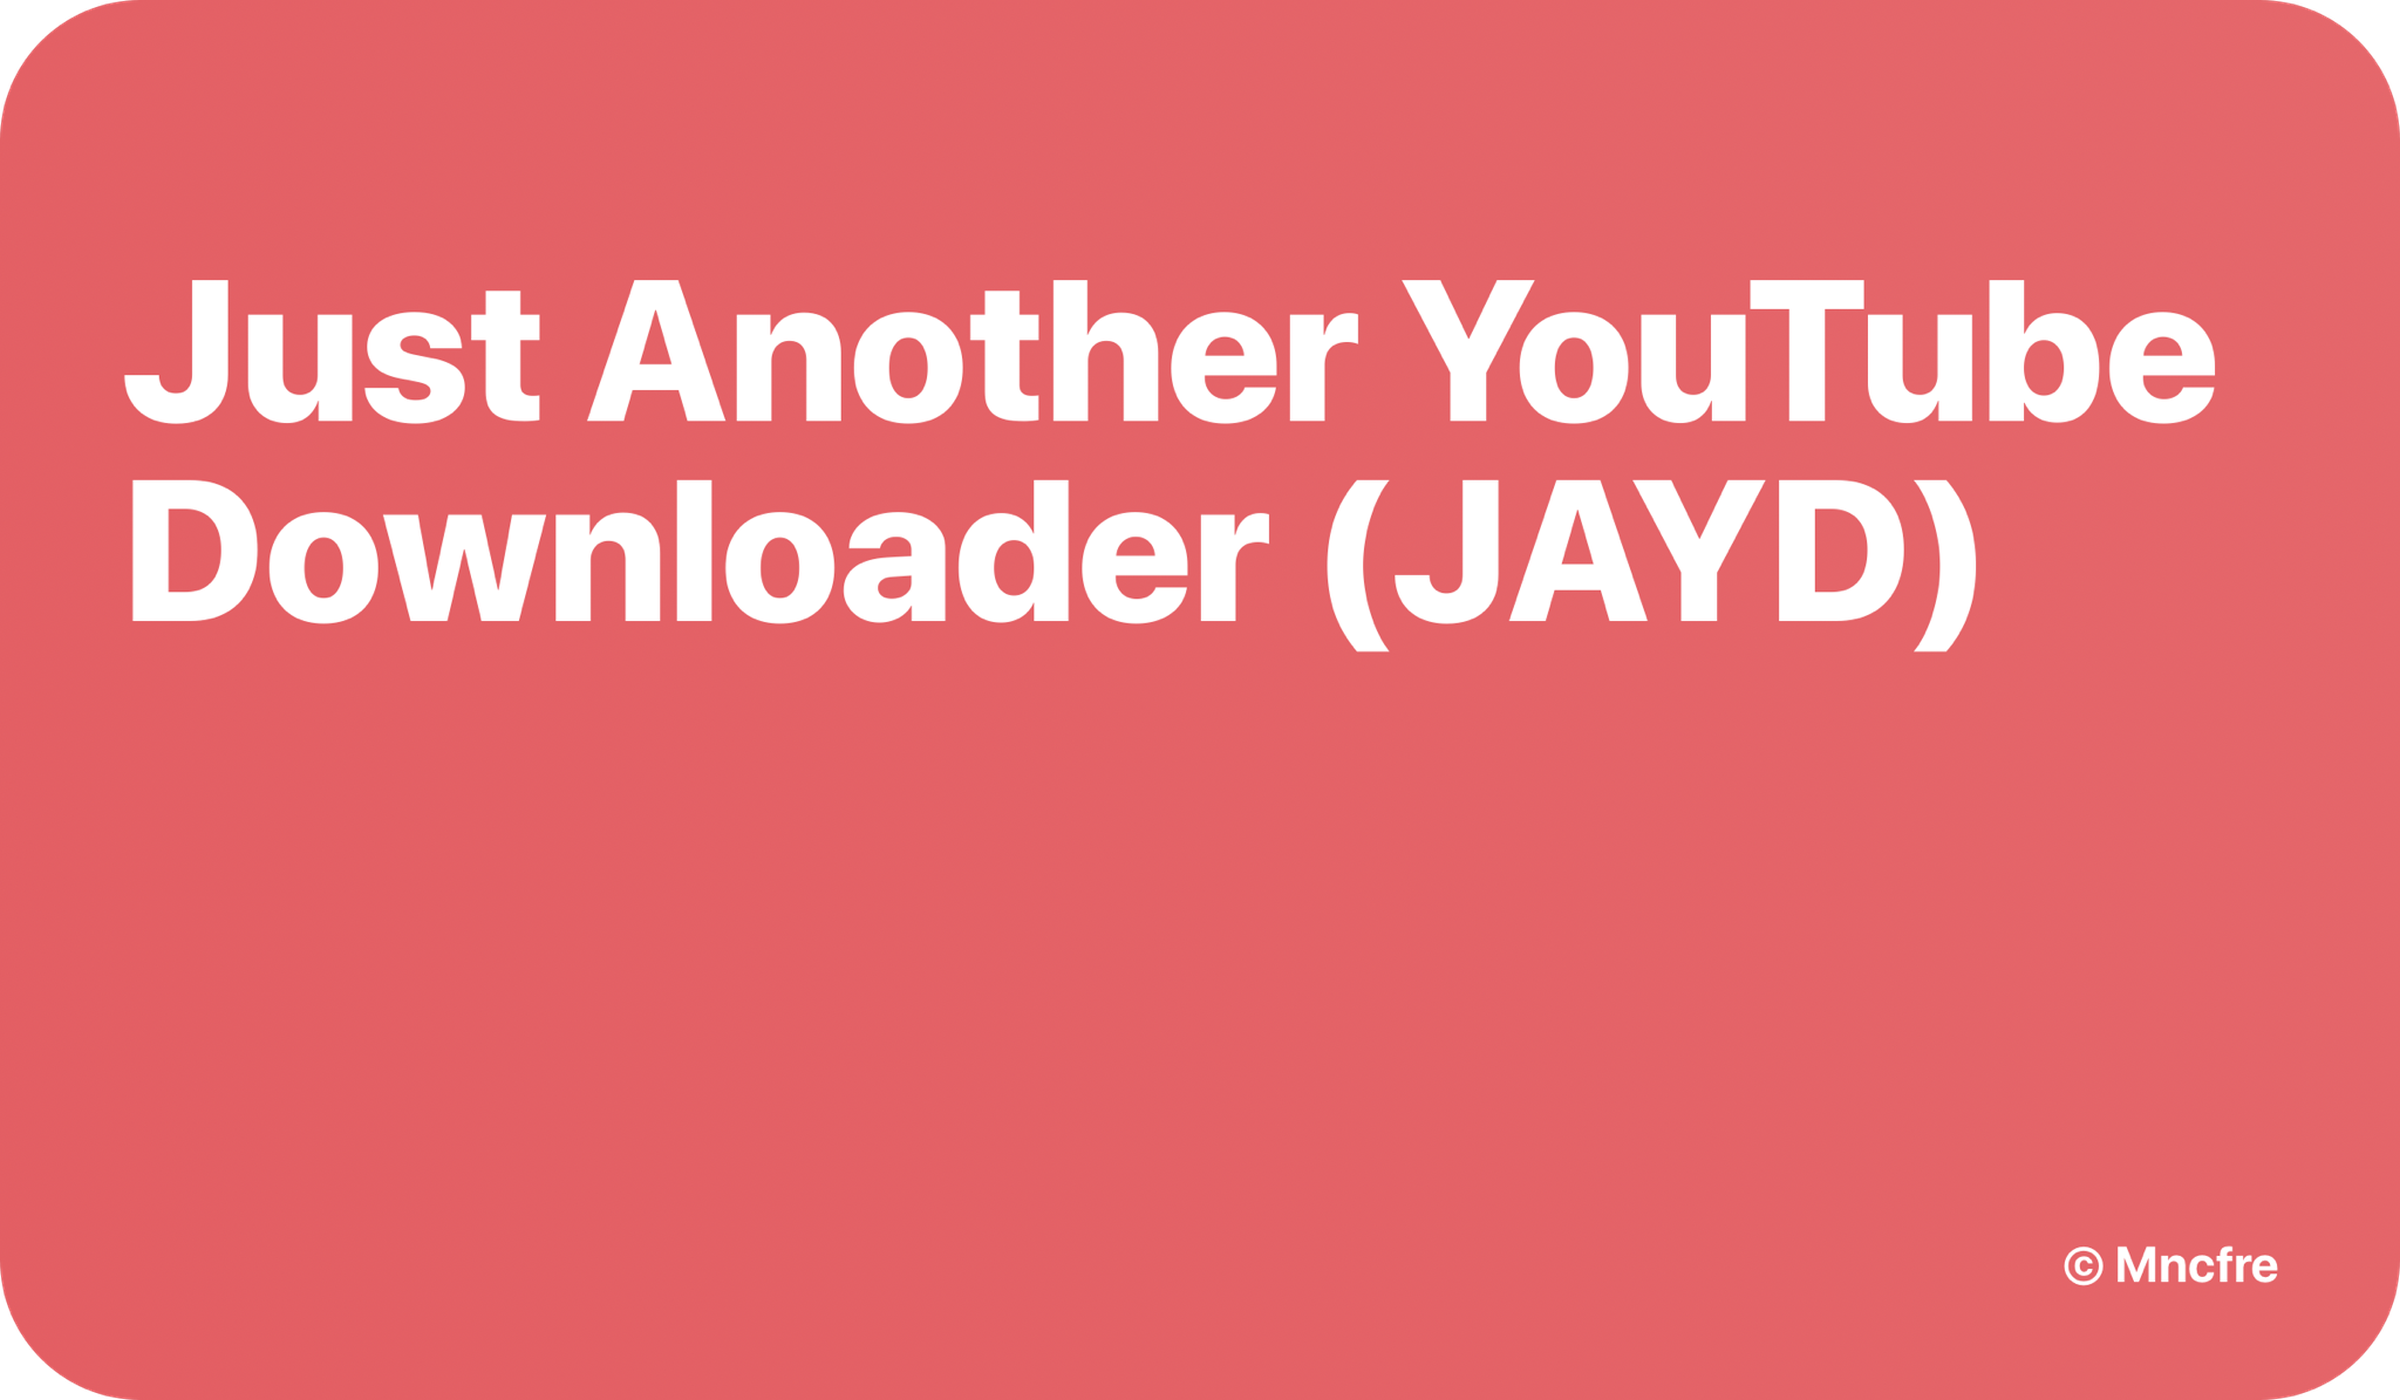 An image of the logo for Just Another YouTube Downloader.